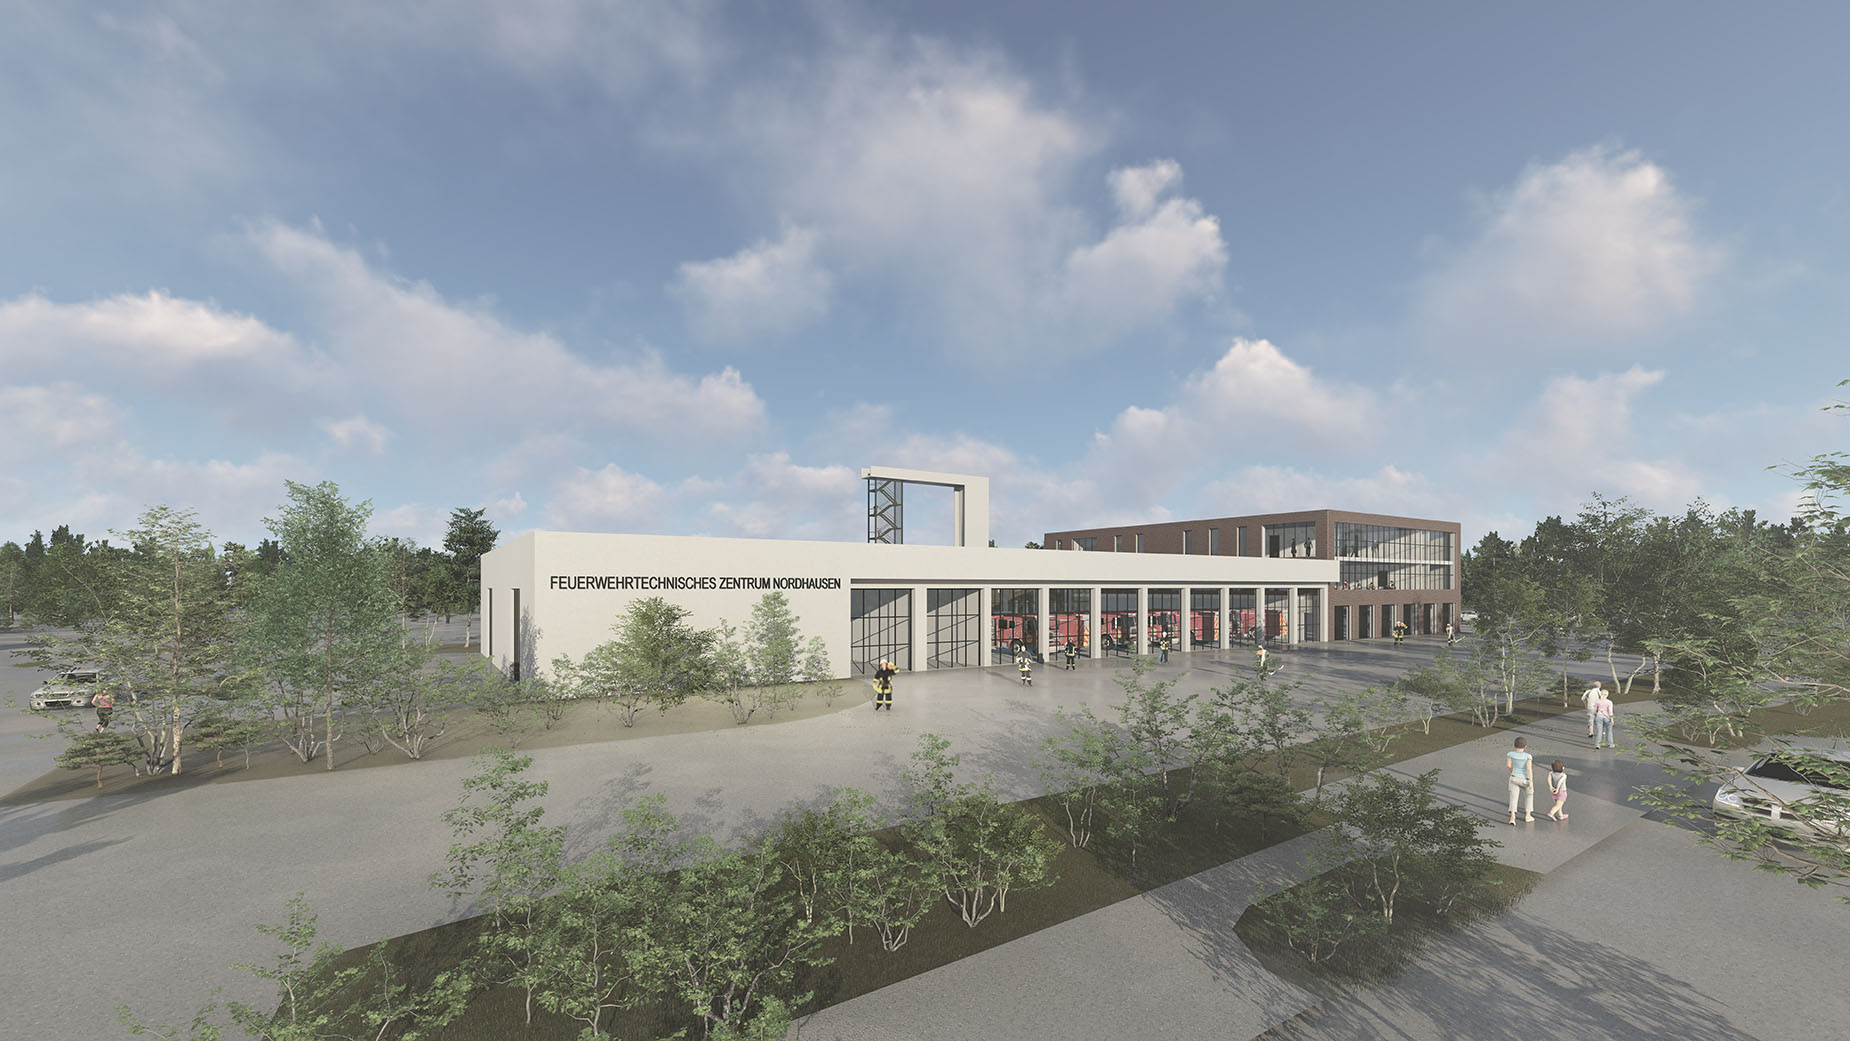 Architectural competition for the construction of a new fire brigade technical centre in Nordhausen for the Städtische Wohnungsbaugesellschaft mbH (SWG).